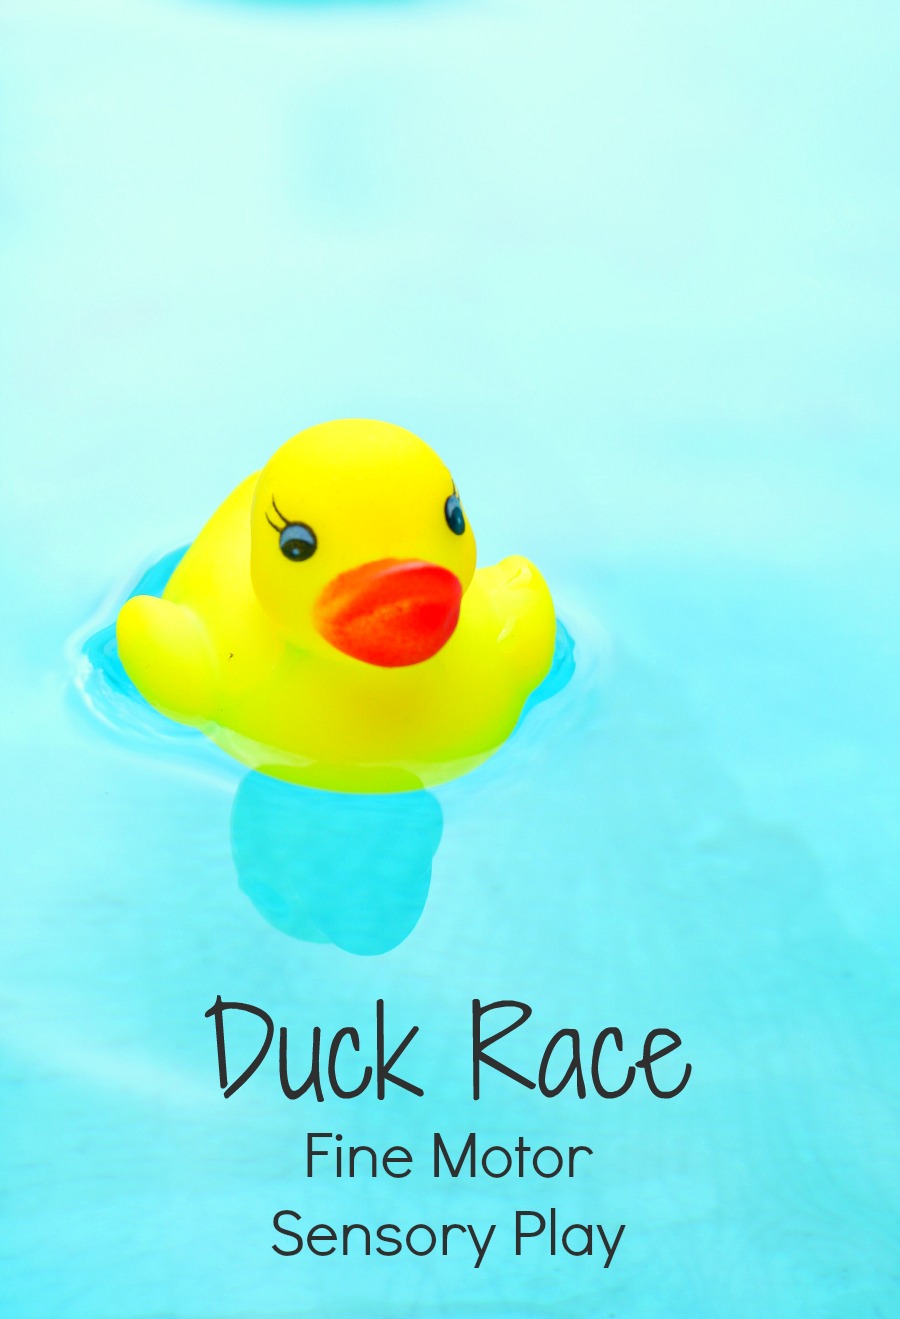 Duck Race Fine Motor Sensory Play for Toddlers